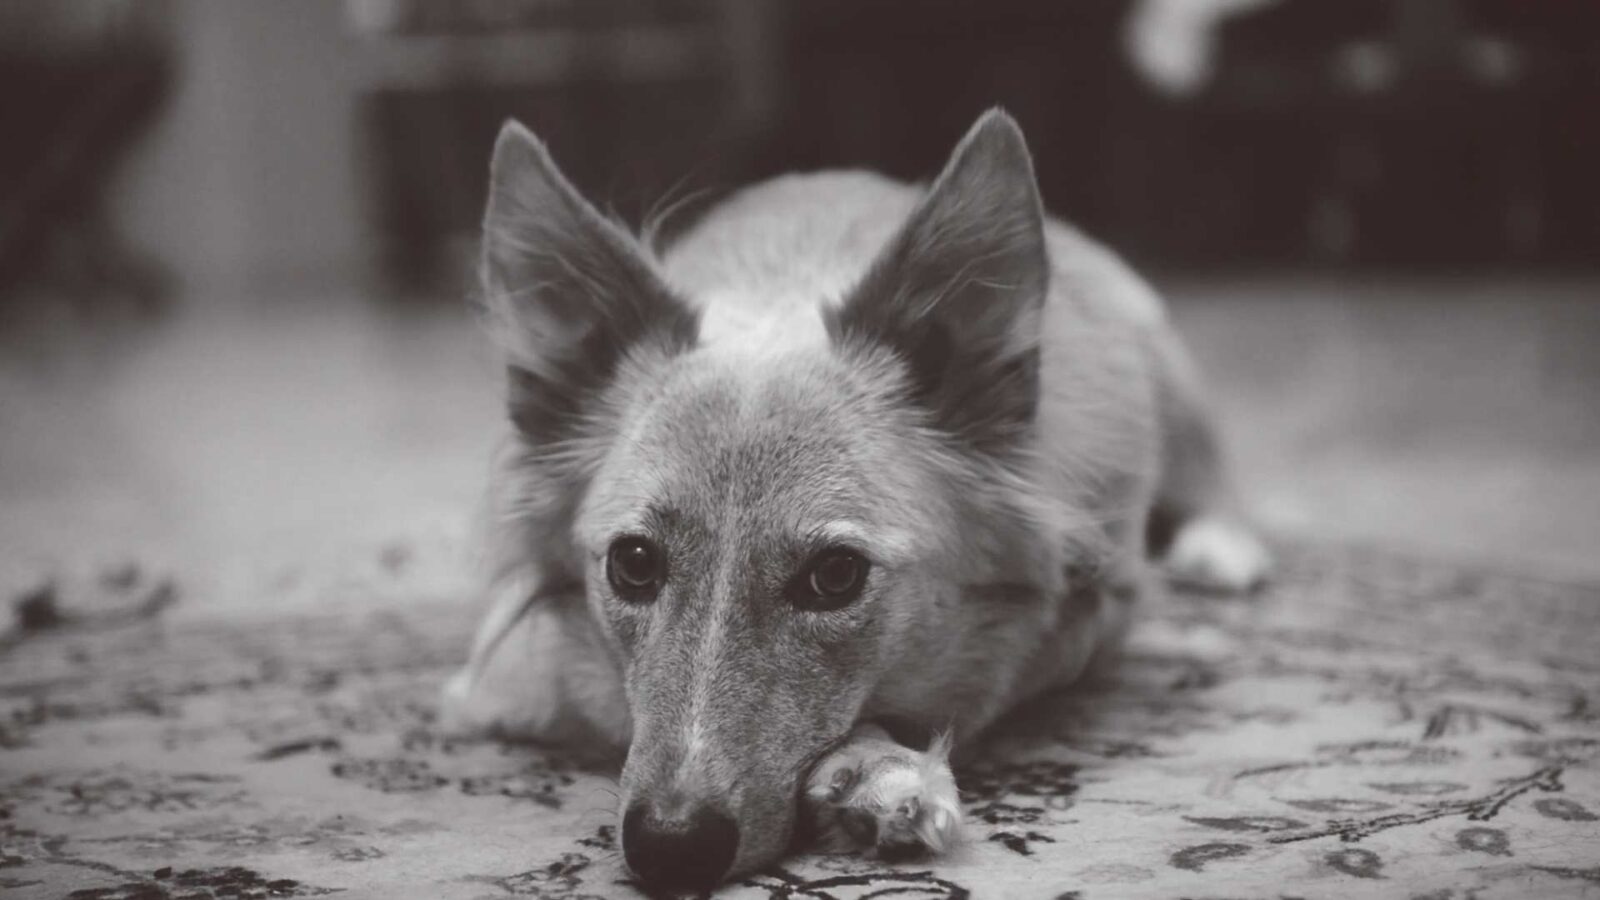 LiveWallpapers4Free.com | Fluffy Ears Dog Grayscale - Free Live Wallpaper